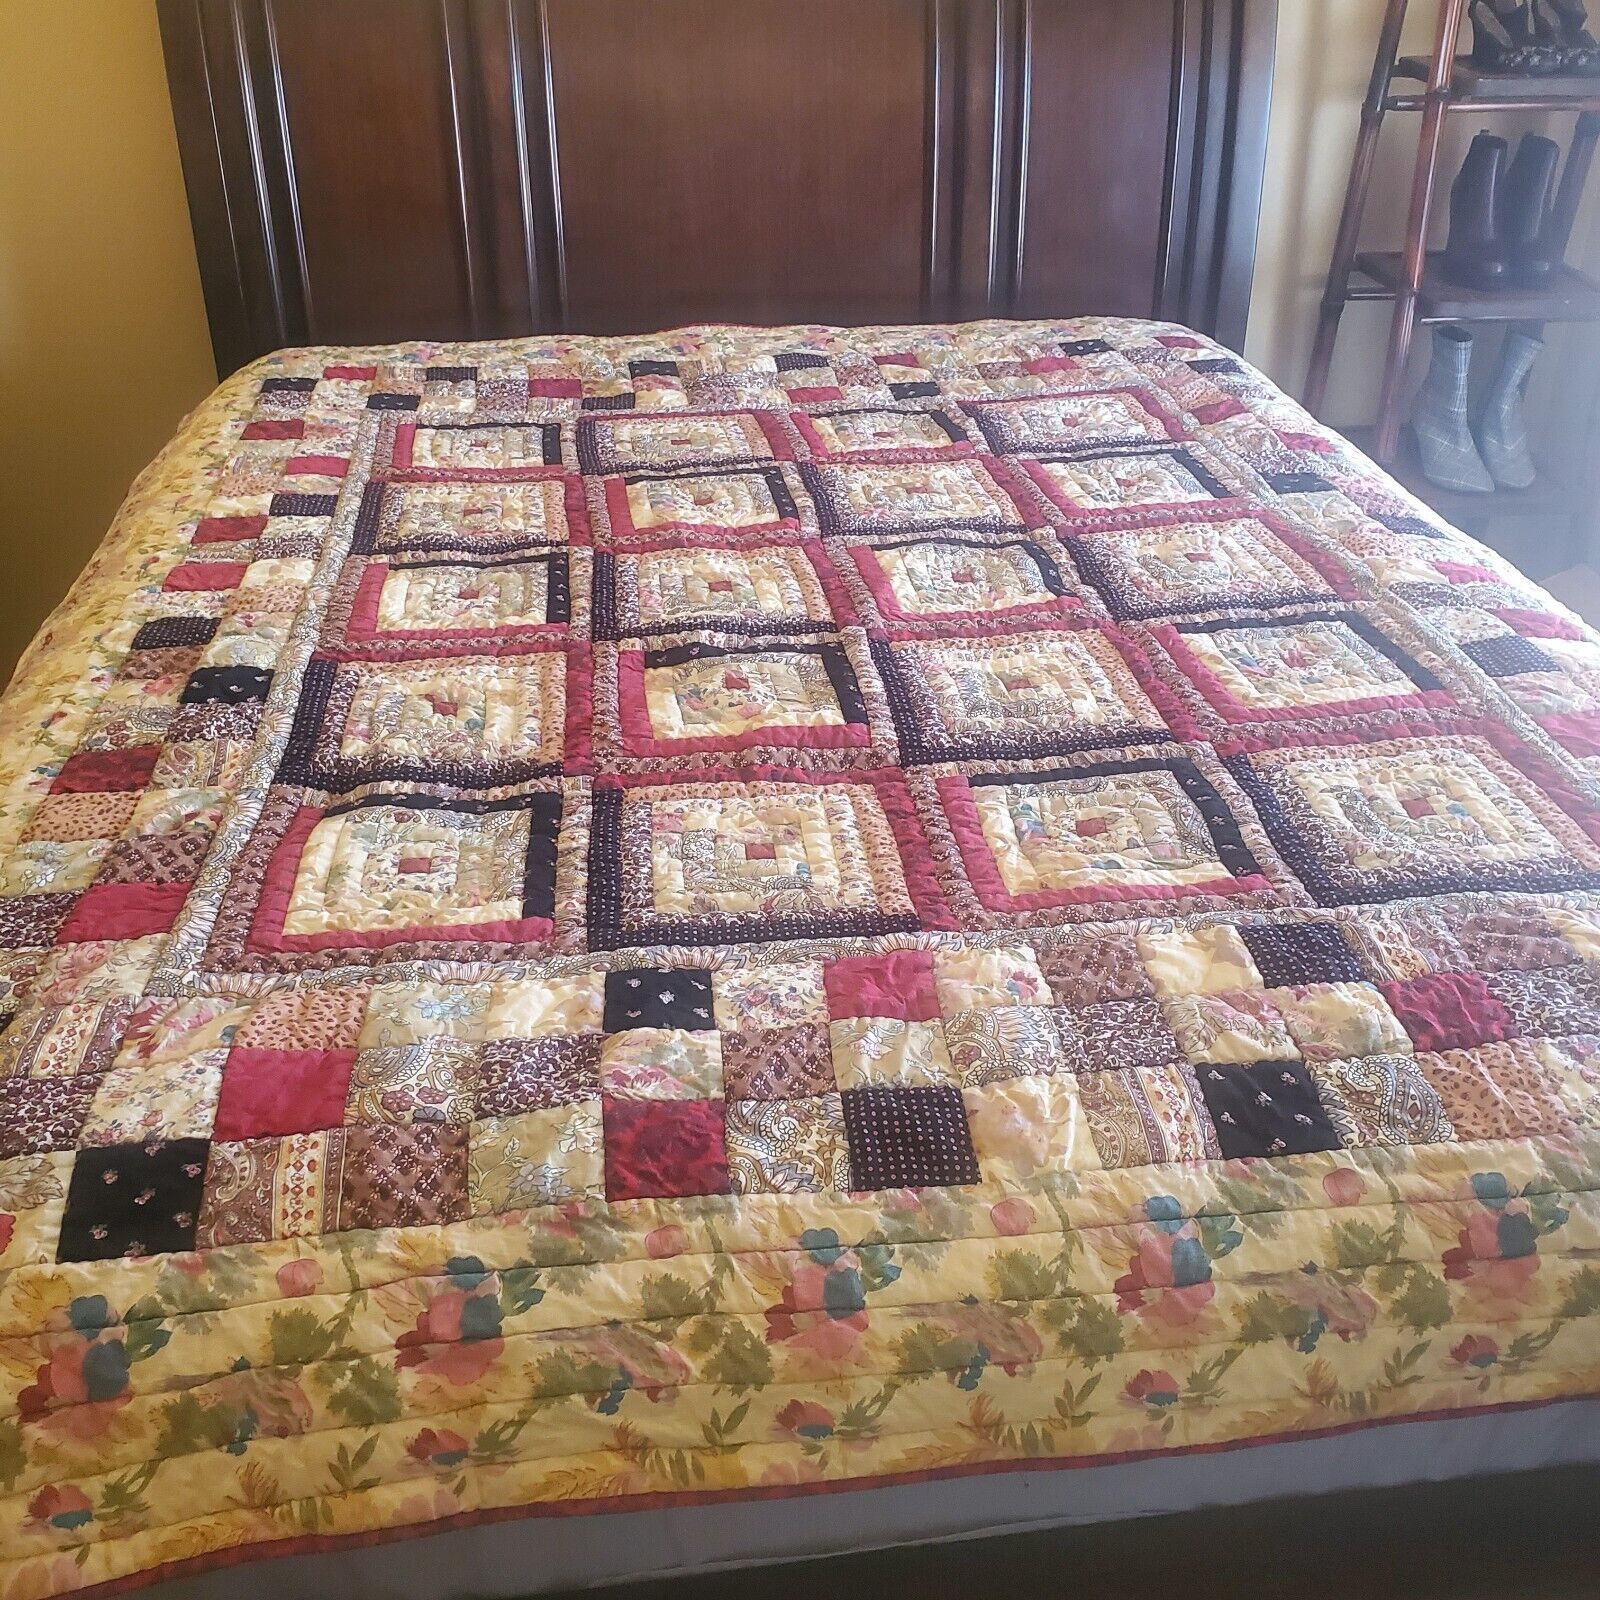 LNT Log Cabin Block/ Sunshine and Shadow Pattern / twin size quilt hand crafted